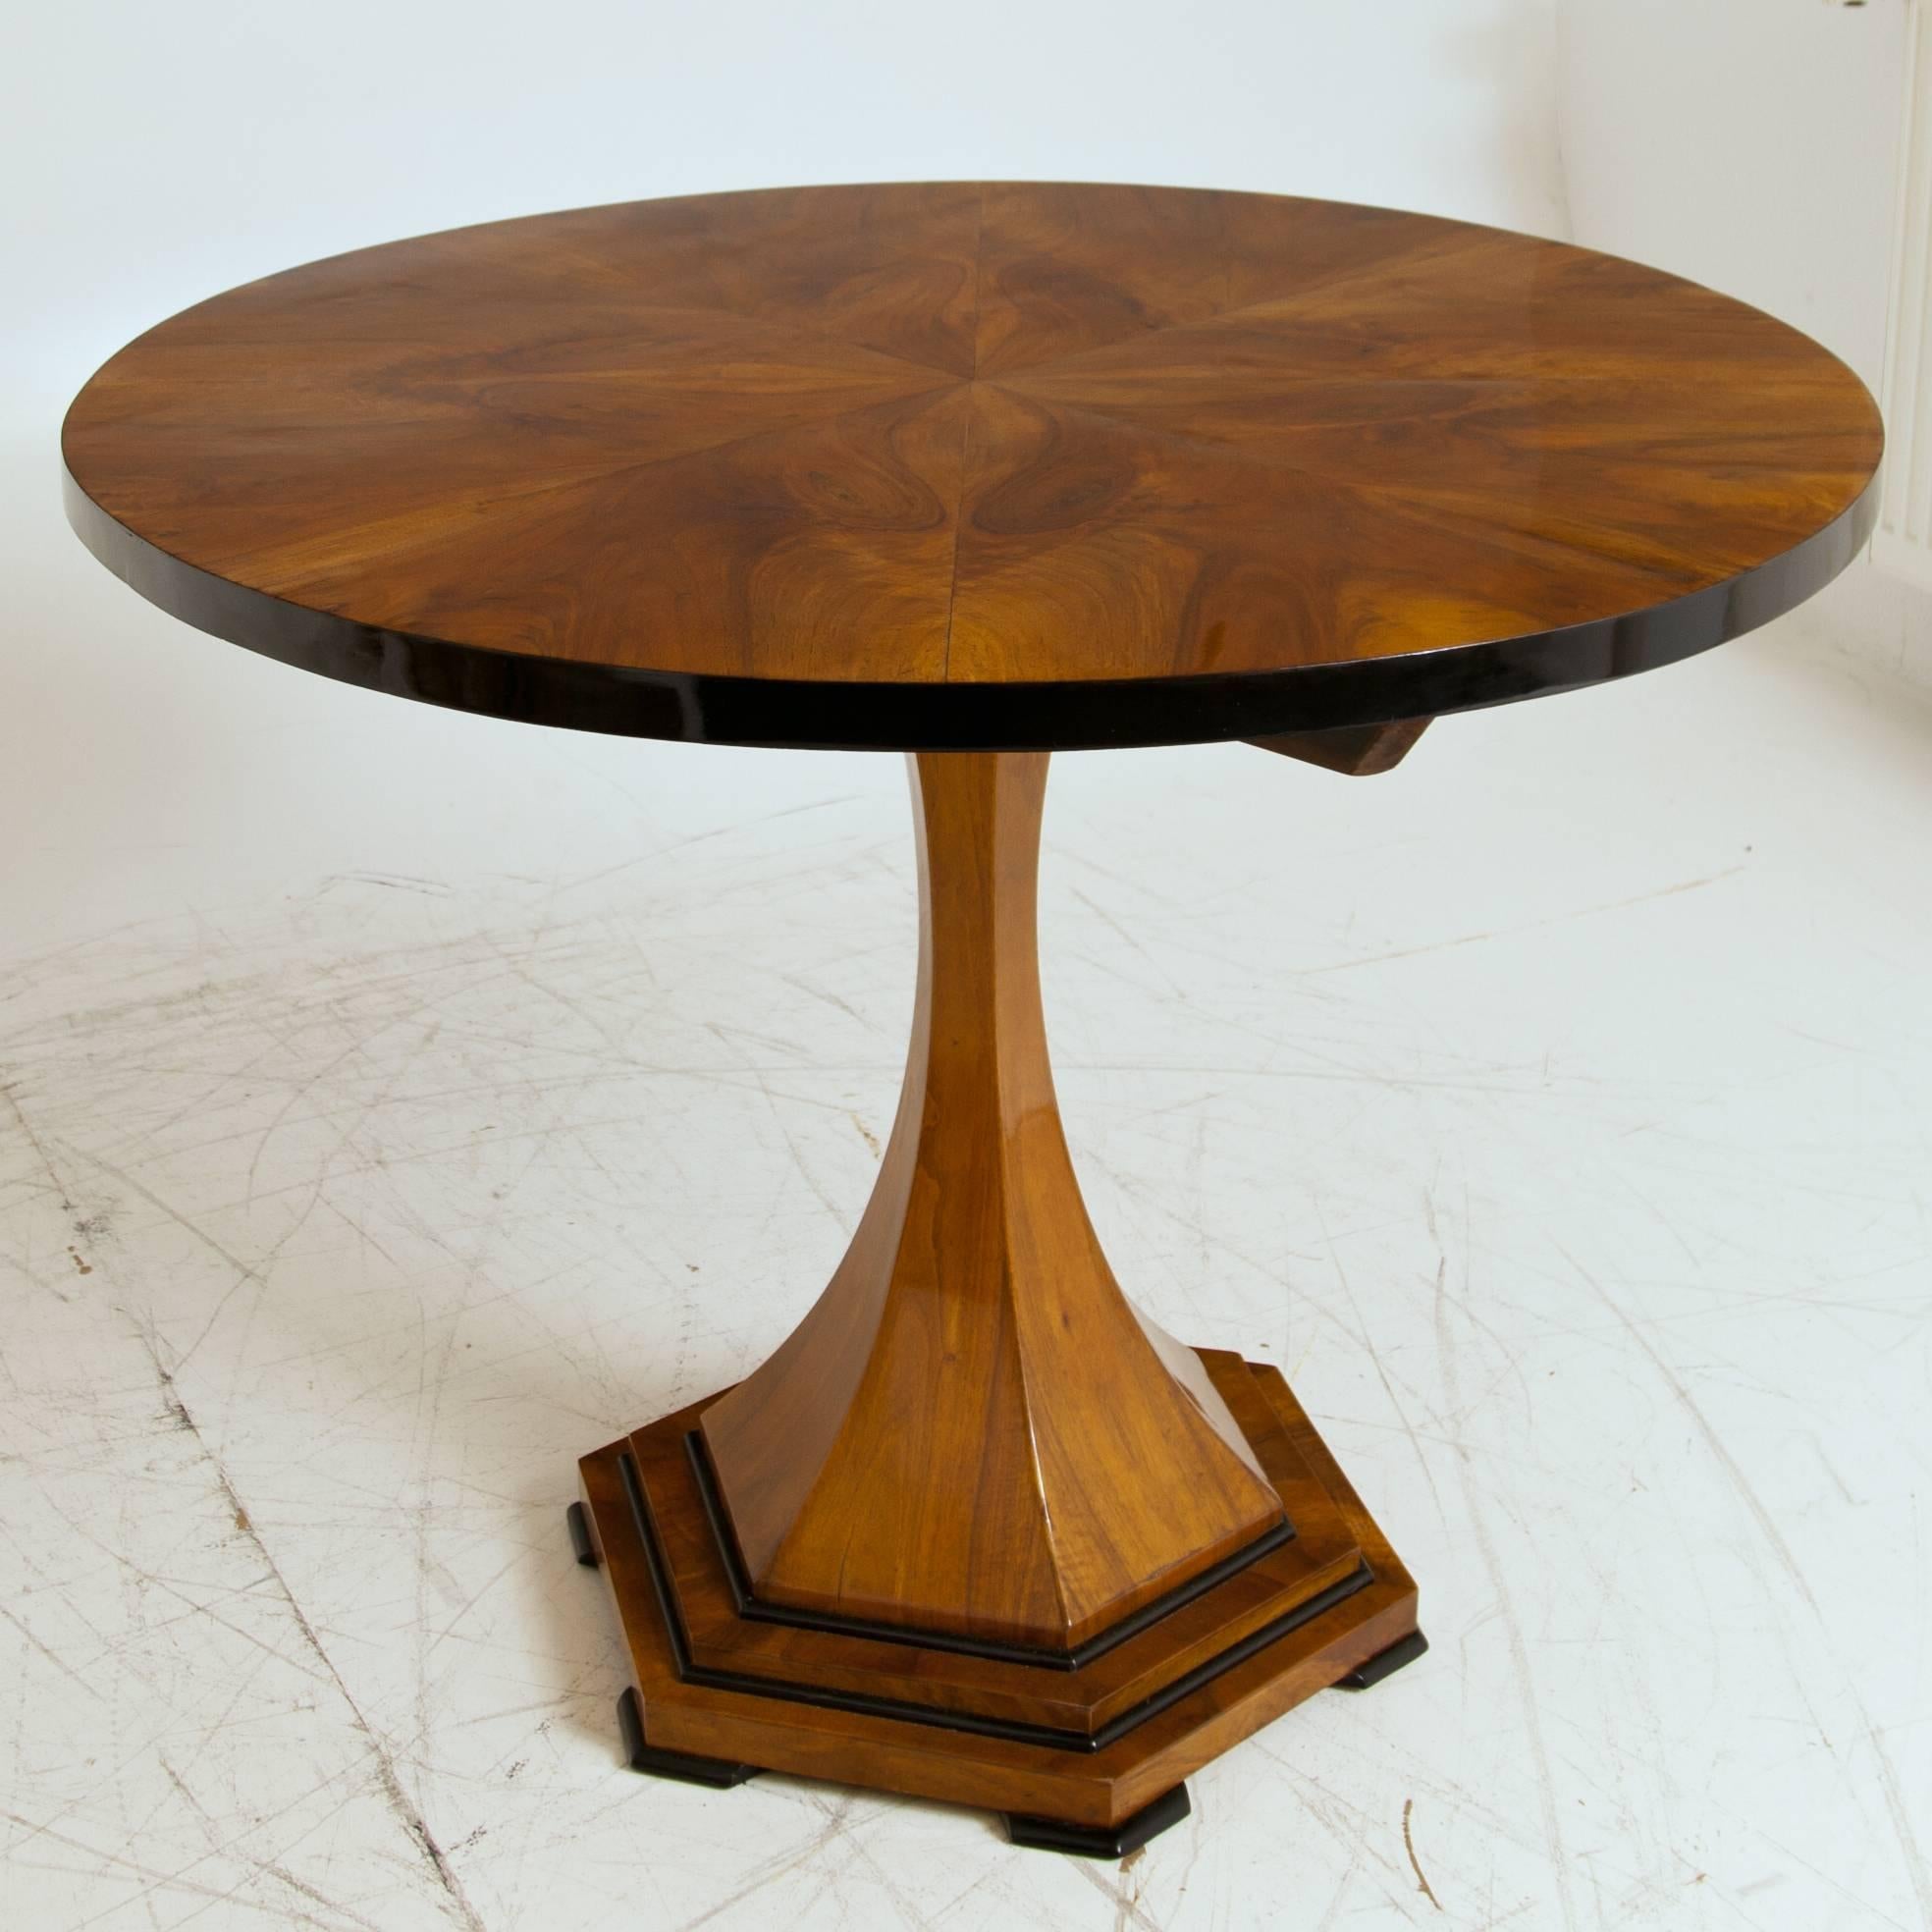 Biedermeier salon table on a hexagonal tapered column with ebonized mouldings. The tabletop shows a star-shaped mirrored veneer and has an ebonized edge. The table is in a very good restored condition.